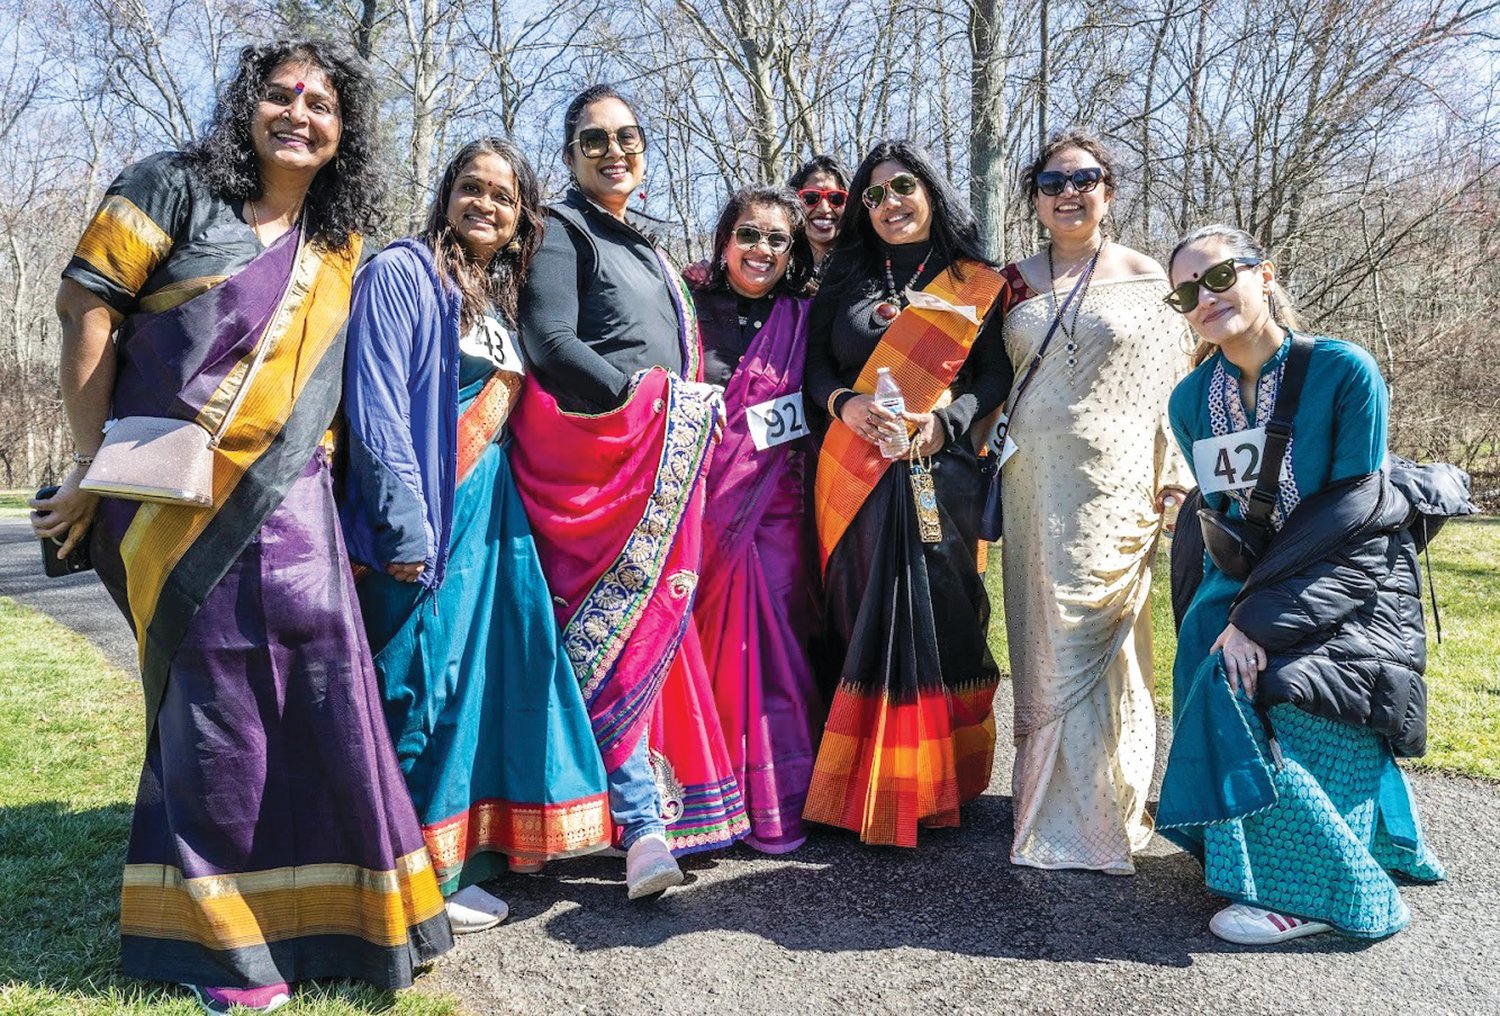 Saree Run participants were encouraged to wear sarees, which symbolize the heritage and culture of Desi women.